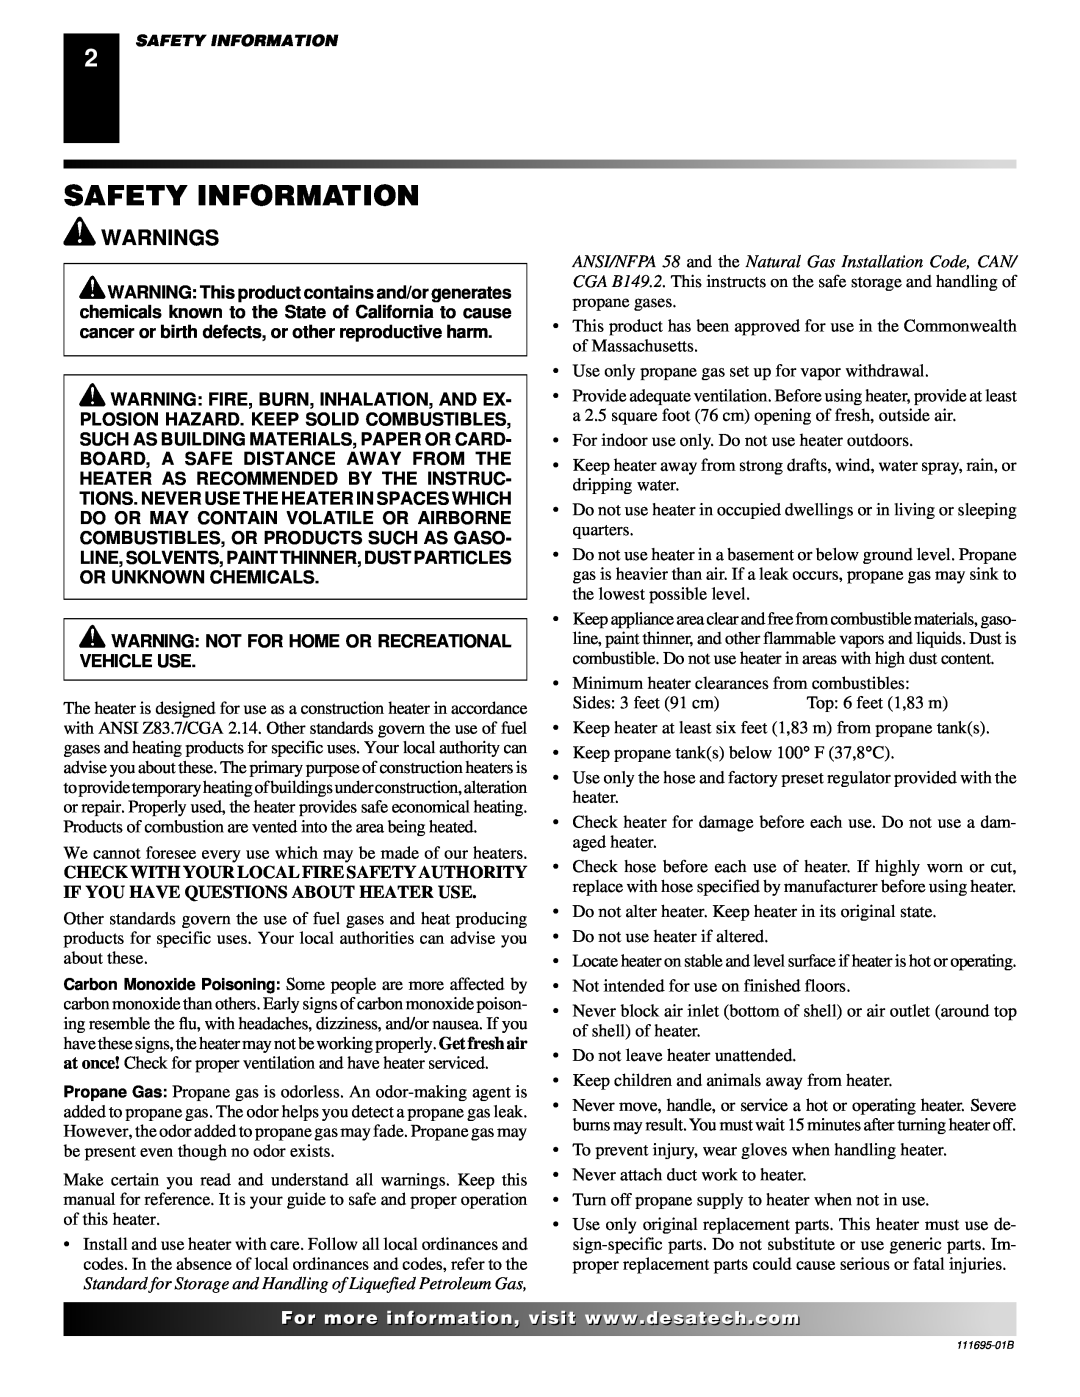 Desa PROPANE CONSTRUCTION CONVECTION HEATER owner manual Safety Information, Warnings 